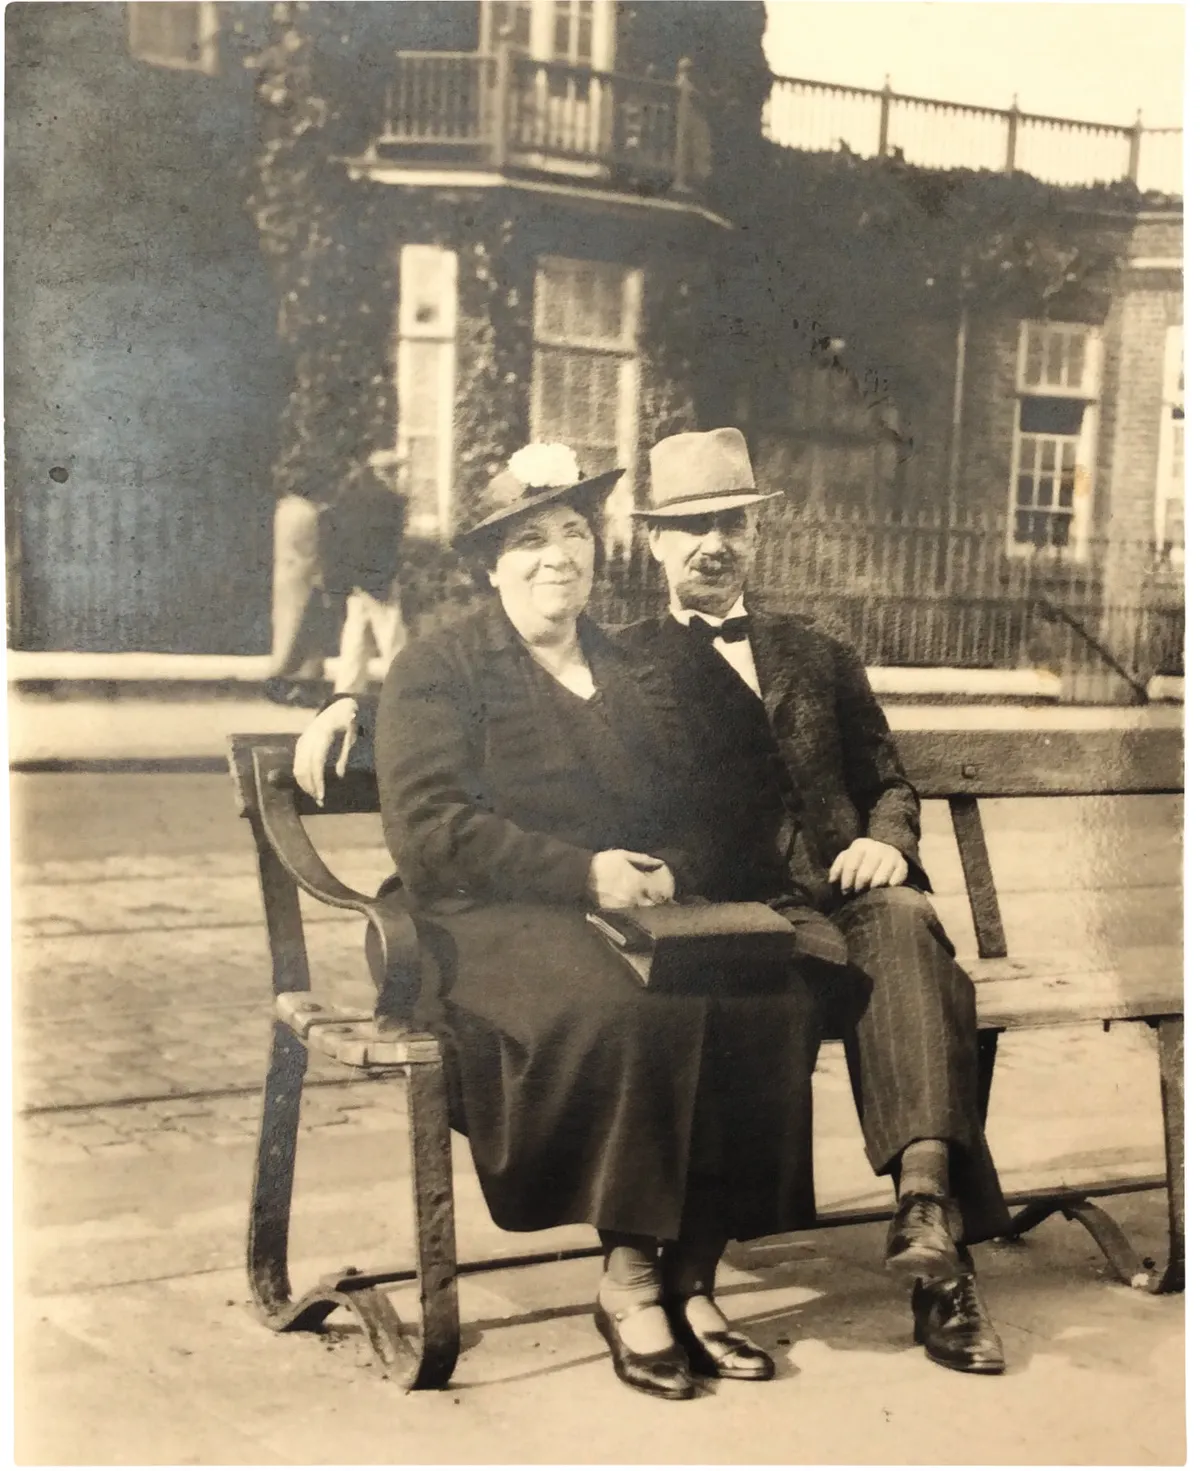 Black and white photograph of an older couple in old-fashioned clothes sitting on a bench